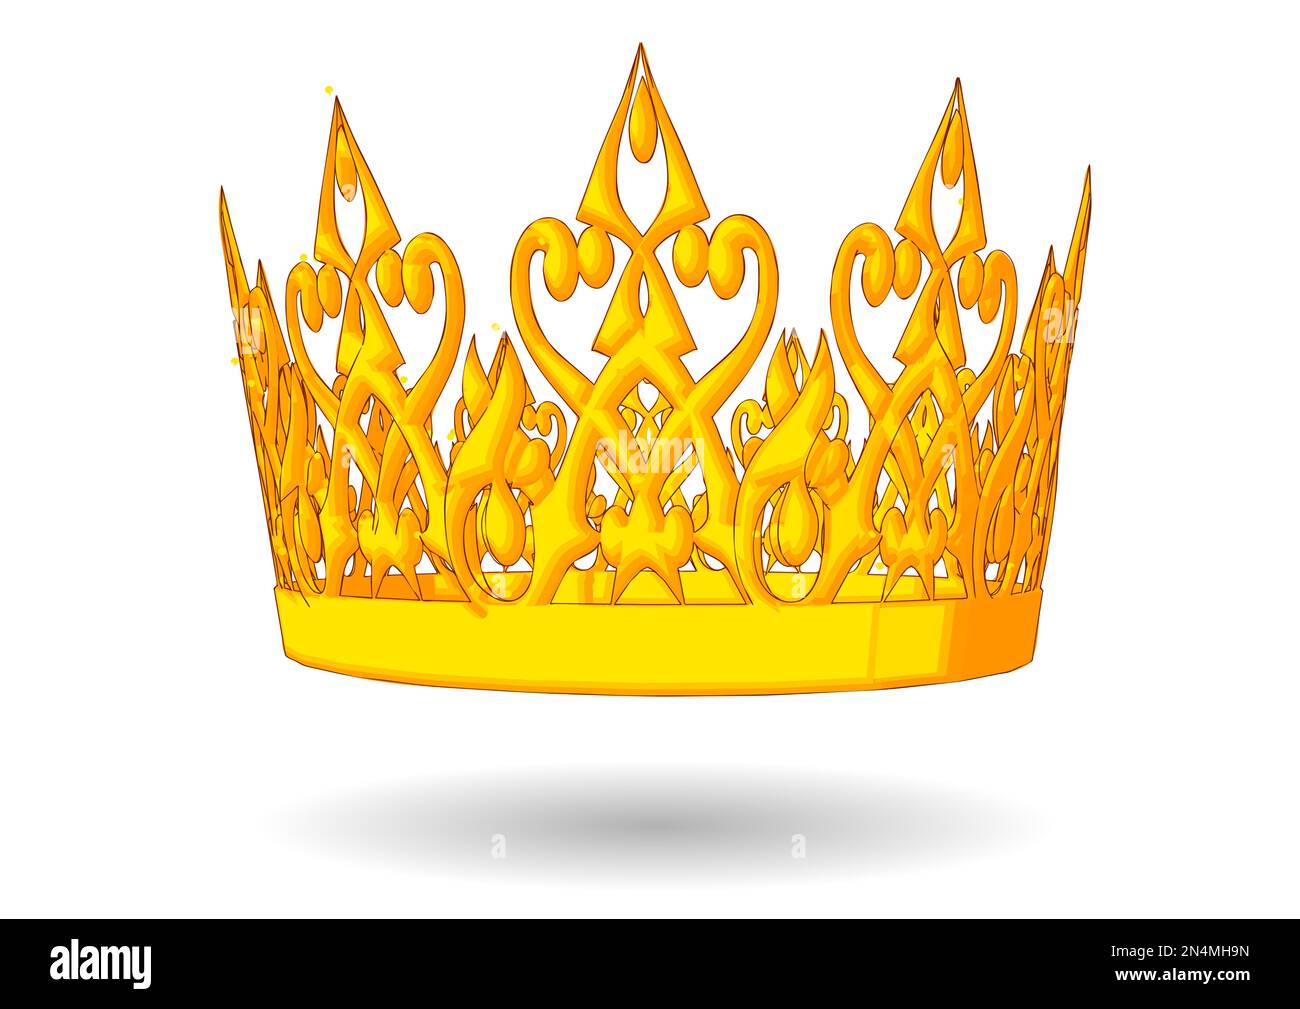 the crown vector illustration on white background Stock Vector